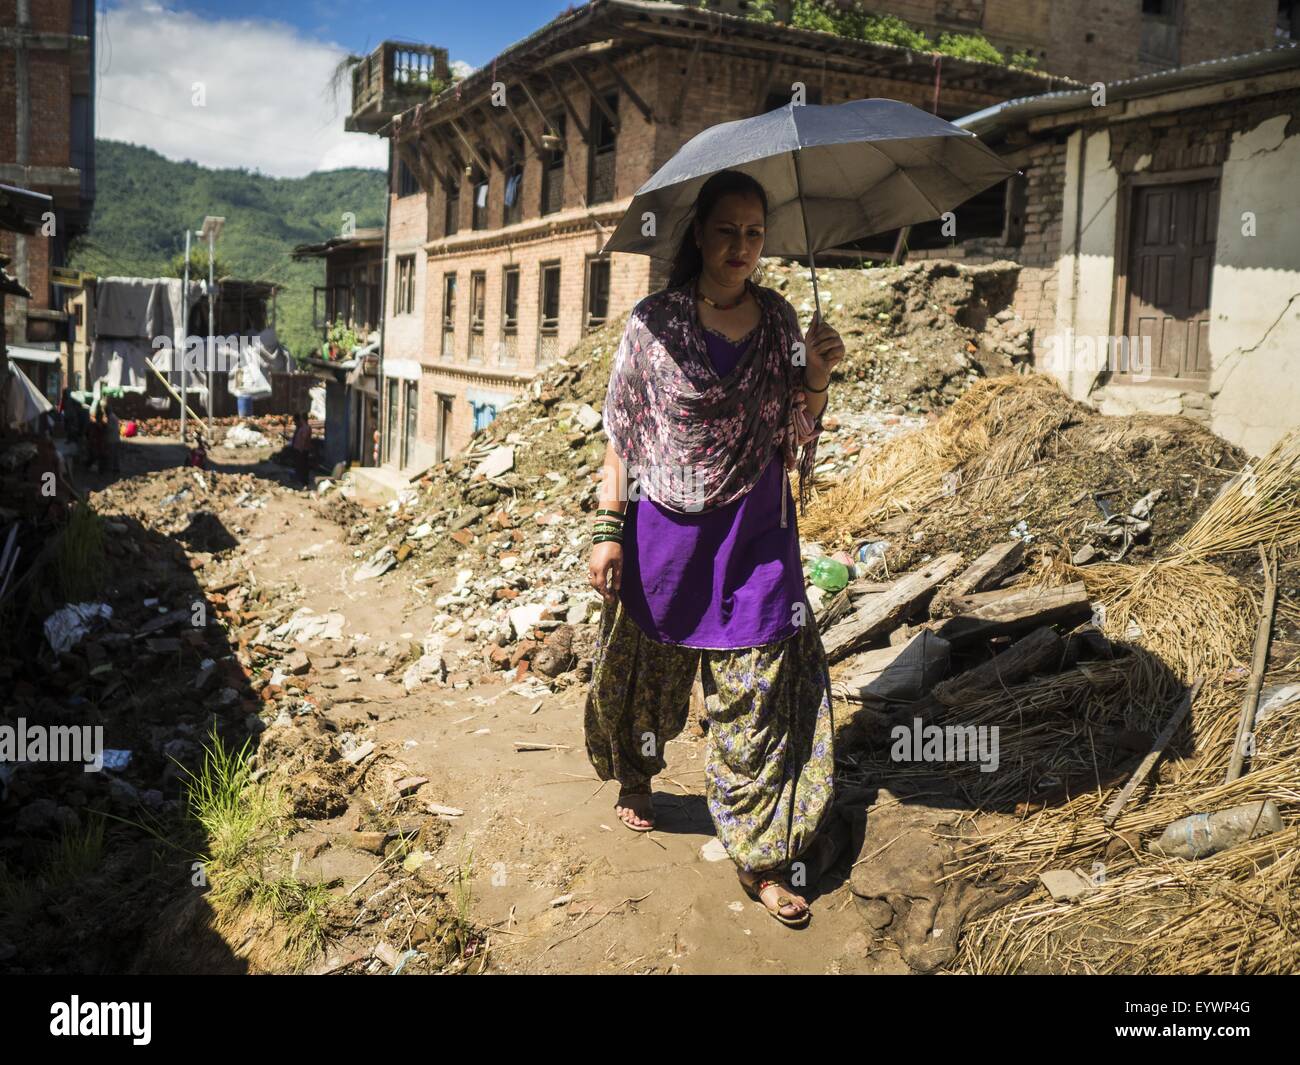 Sankhu, Central Region, Nepal. 3rd Aug, 2015. A woman walks down a street still strewn with debris from the earthquake in Sankhu, a community about 90 minutes from central Kathmandu. The Nepal Earthquake on April 25, 2015, (also known as the Gorkha earthquake) killed more than 9,000 people and injured more than 23,000. It had a magnitude of 7.8.  It was the worst natural disaster to strike Nepal since the 1934 Nepal''“Bihar earthquake. © ZUMA Press, Inc./Alamy Live News Stock Photo